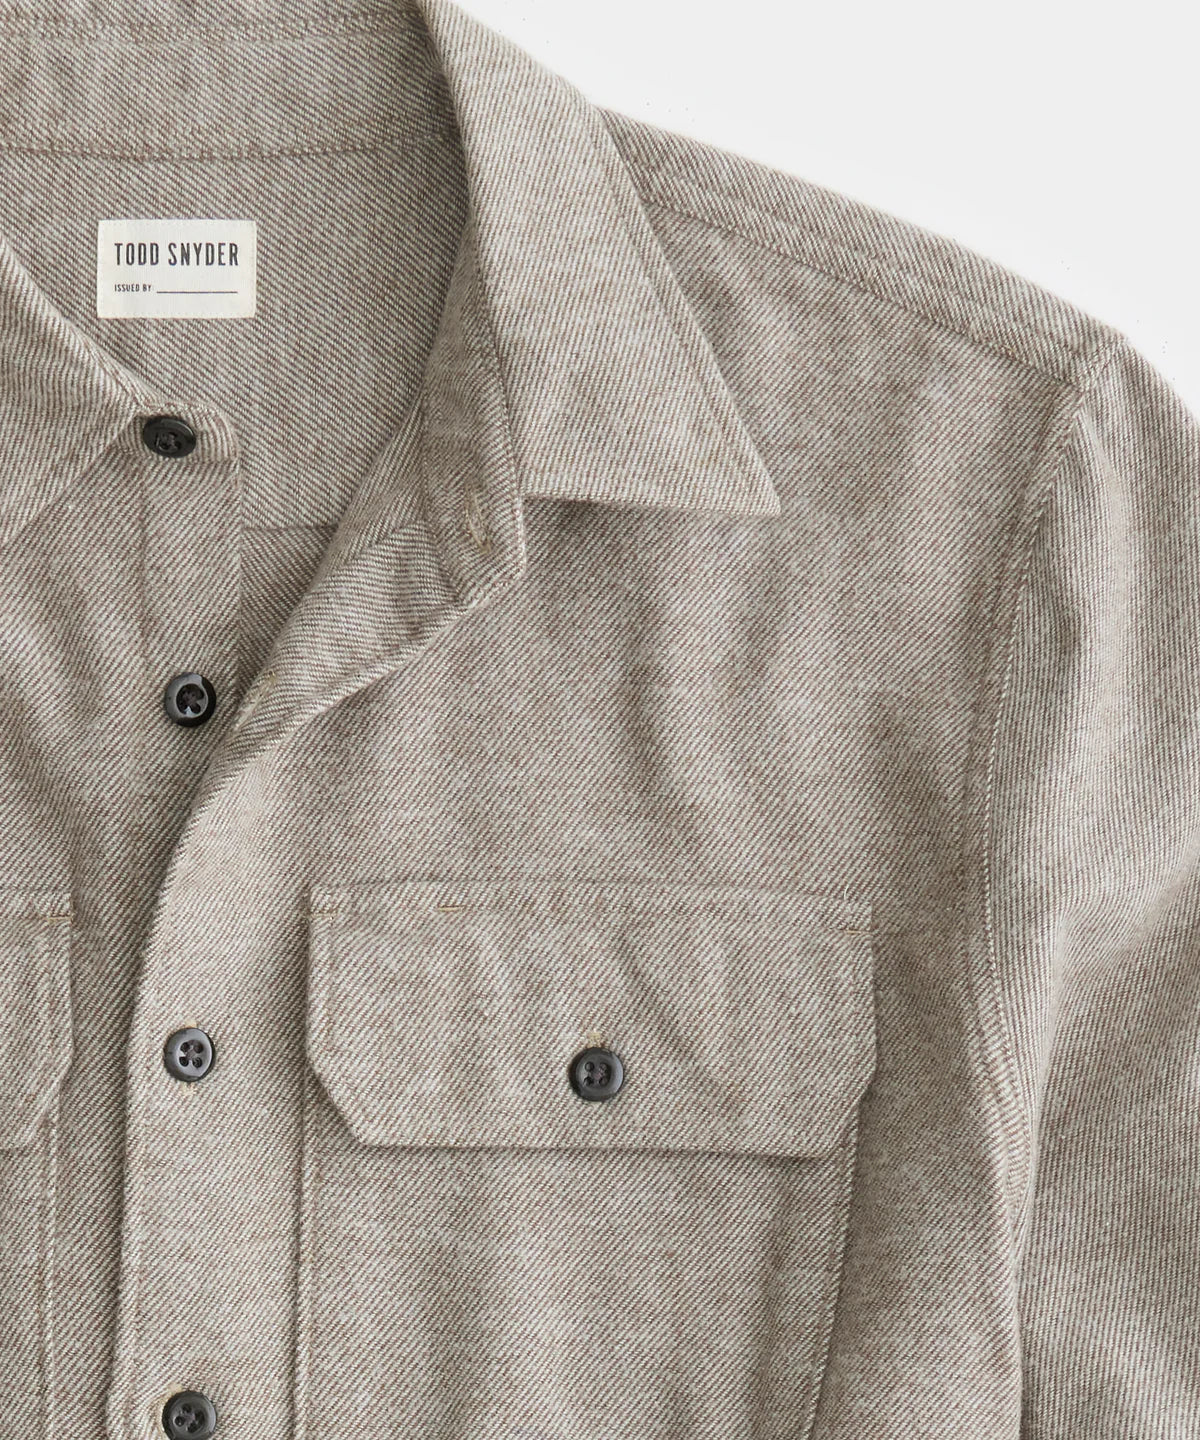 TODD SNYDER TWO POCKET UTILITY LONG SLEEVE SHIRT IN KHAKI